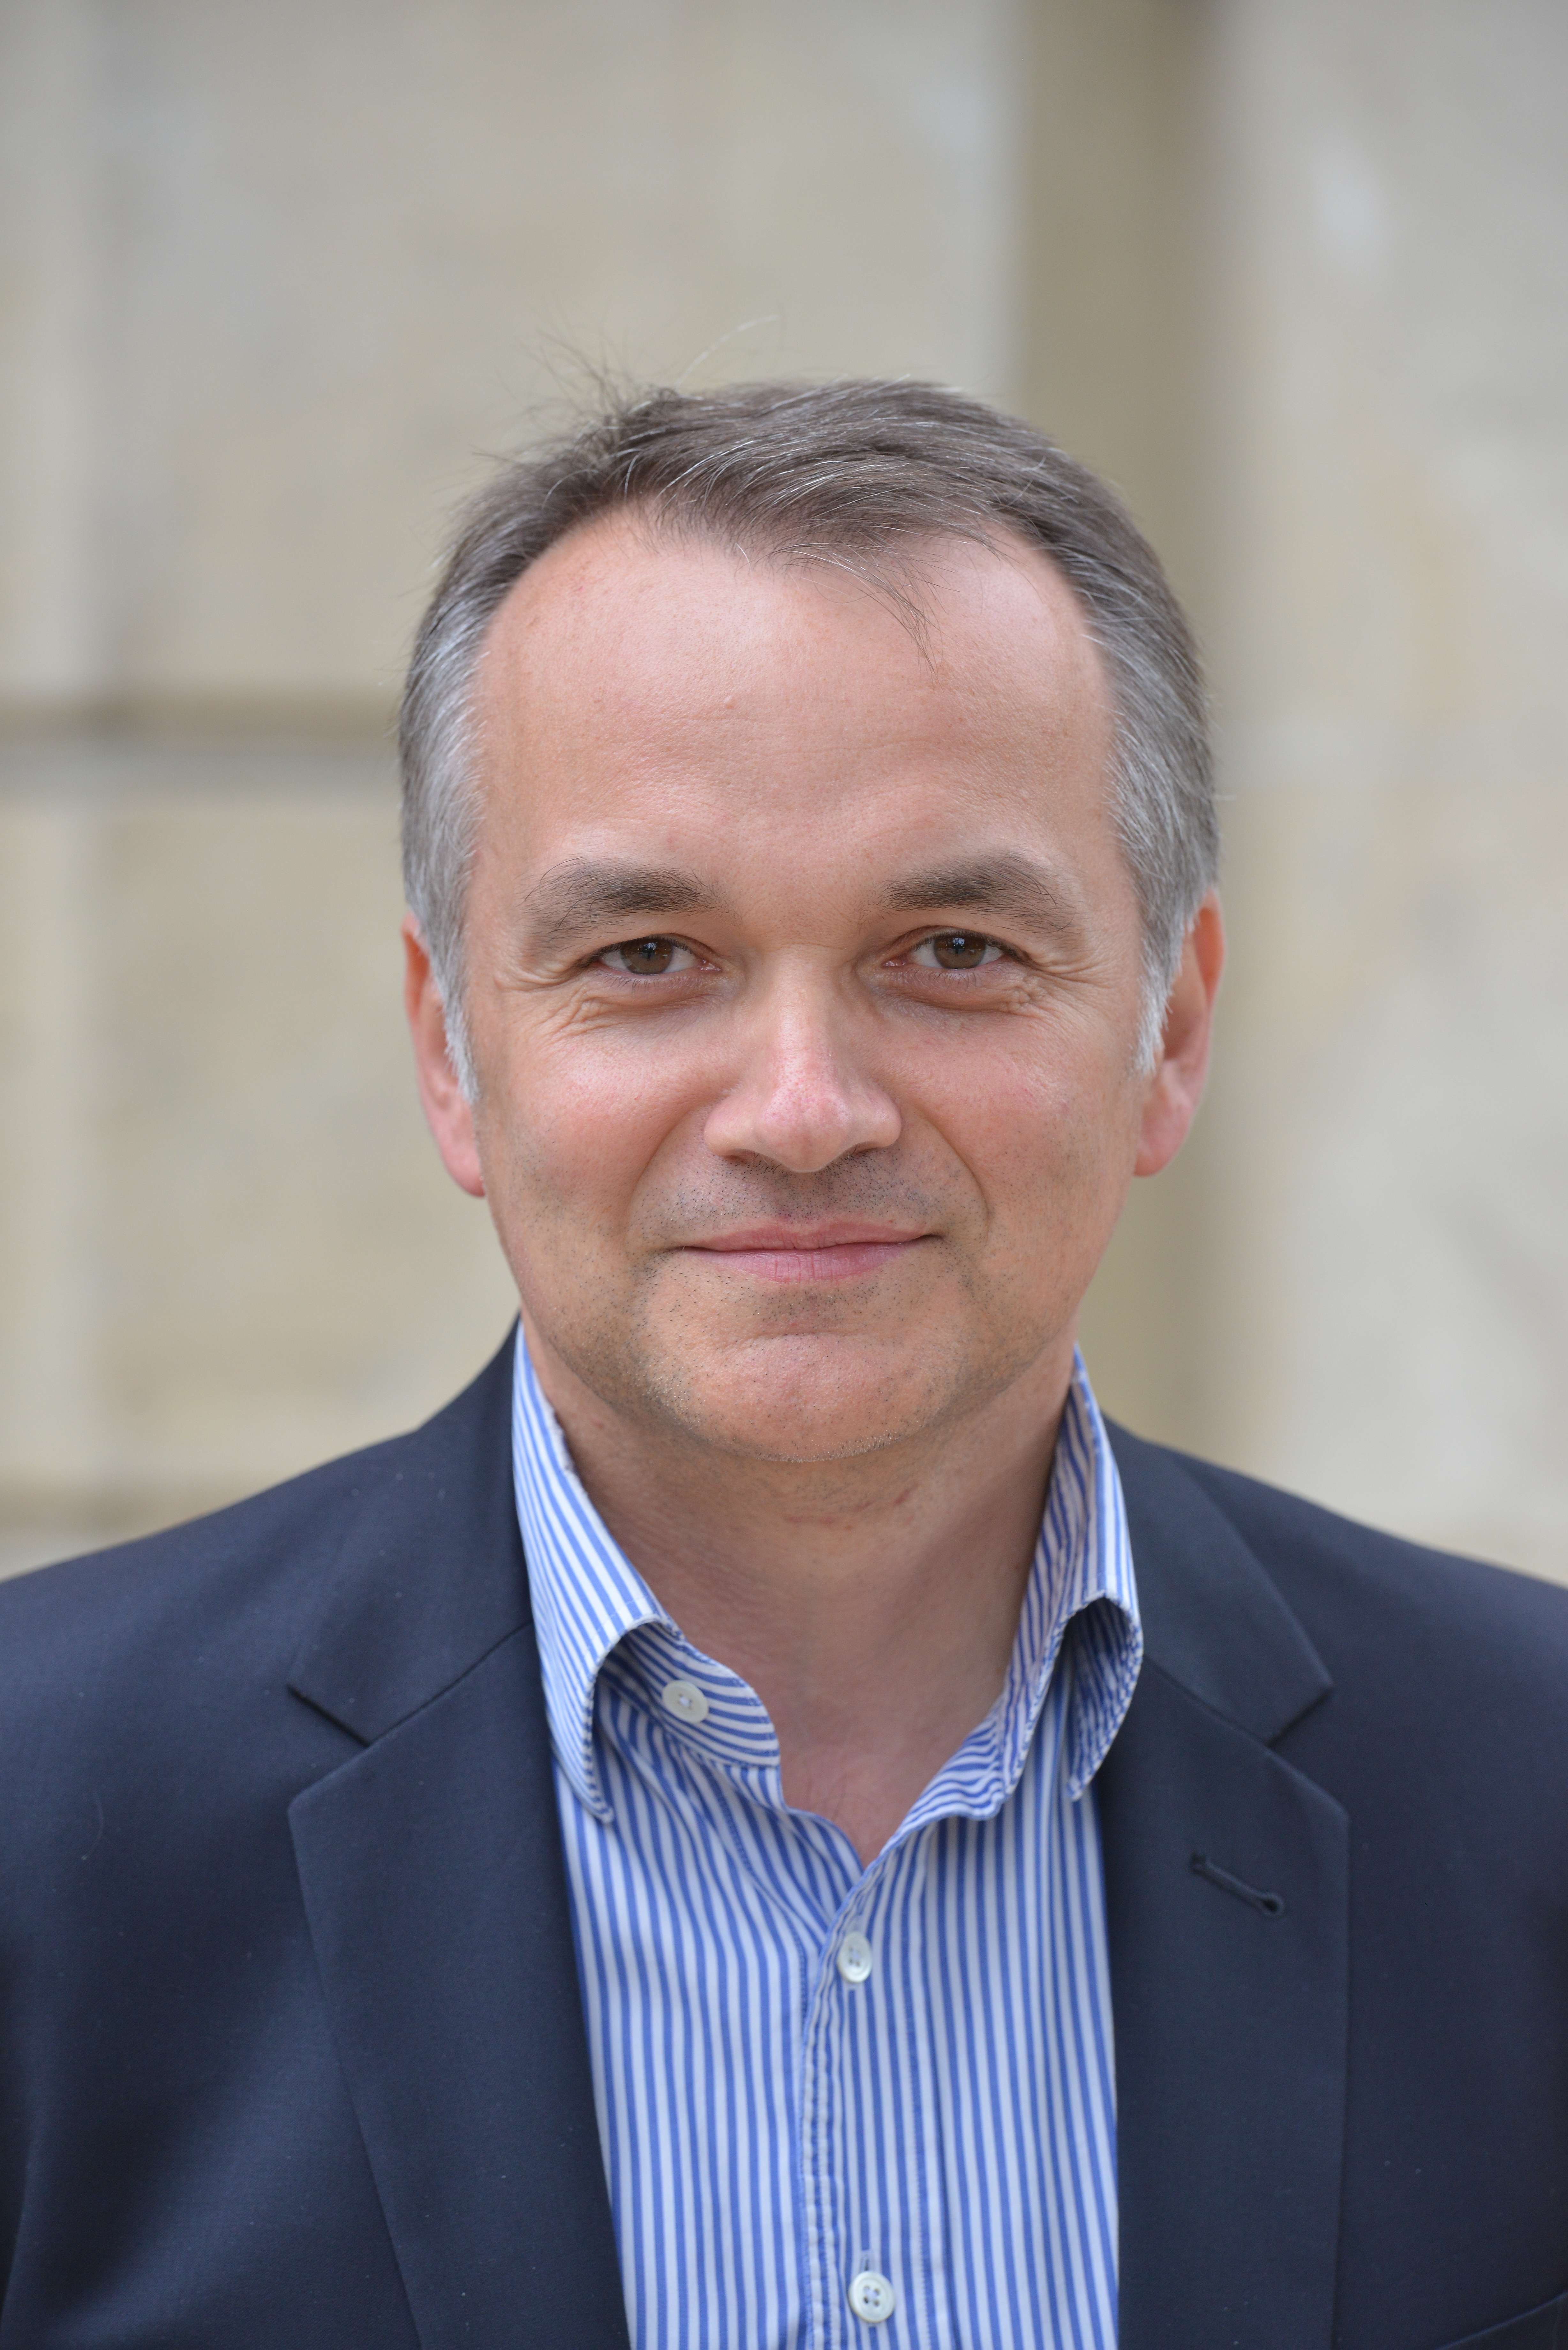 Dominique Astier, executive vice-president and co-founder